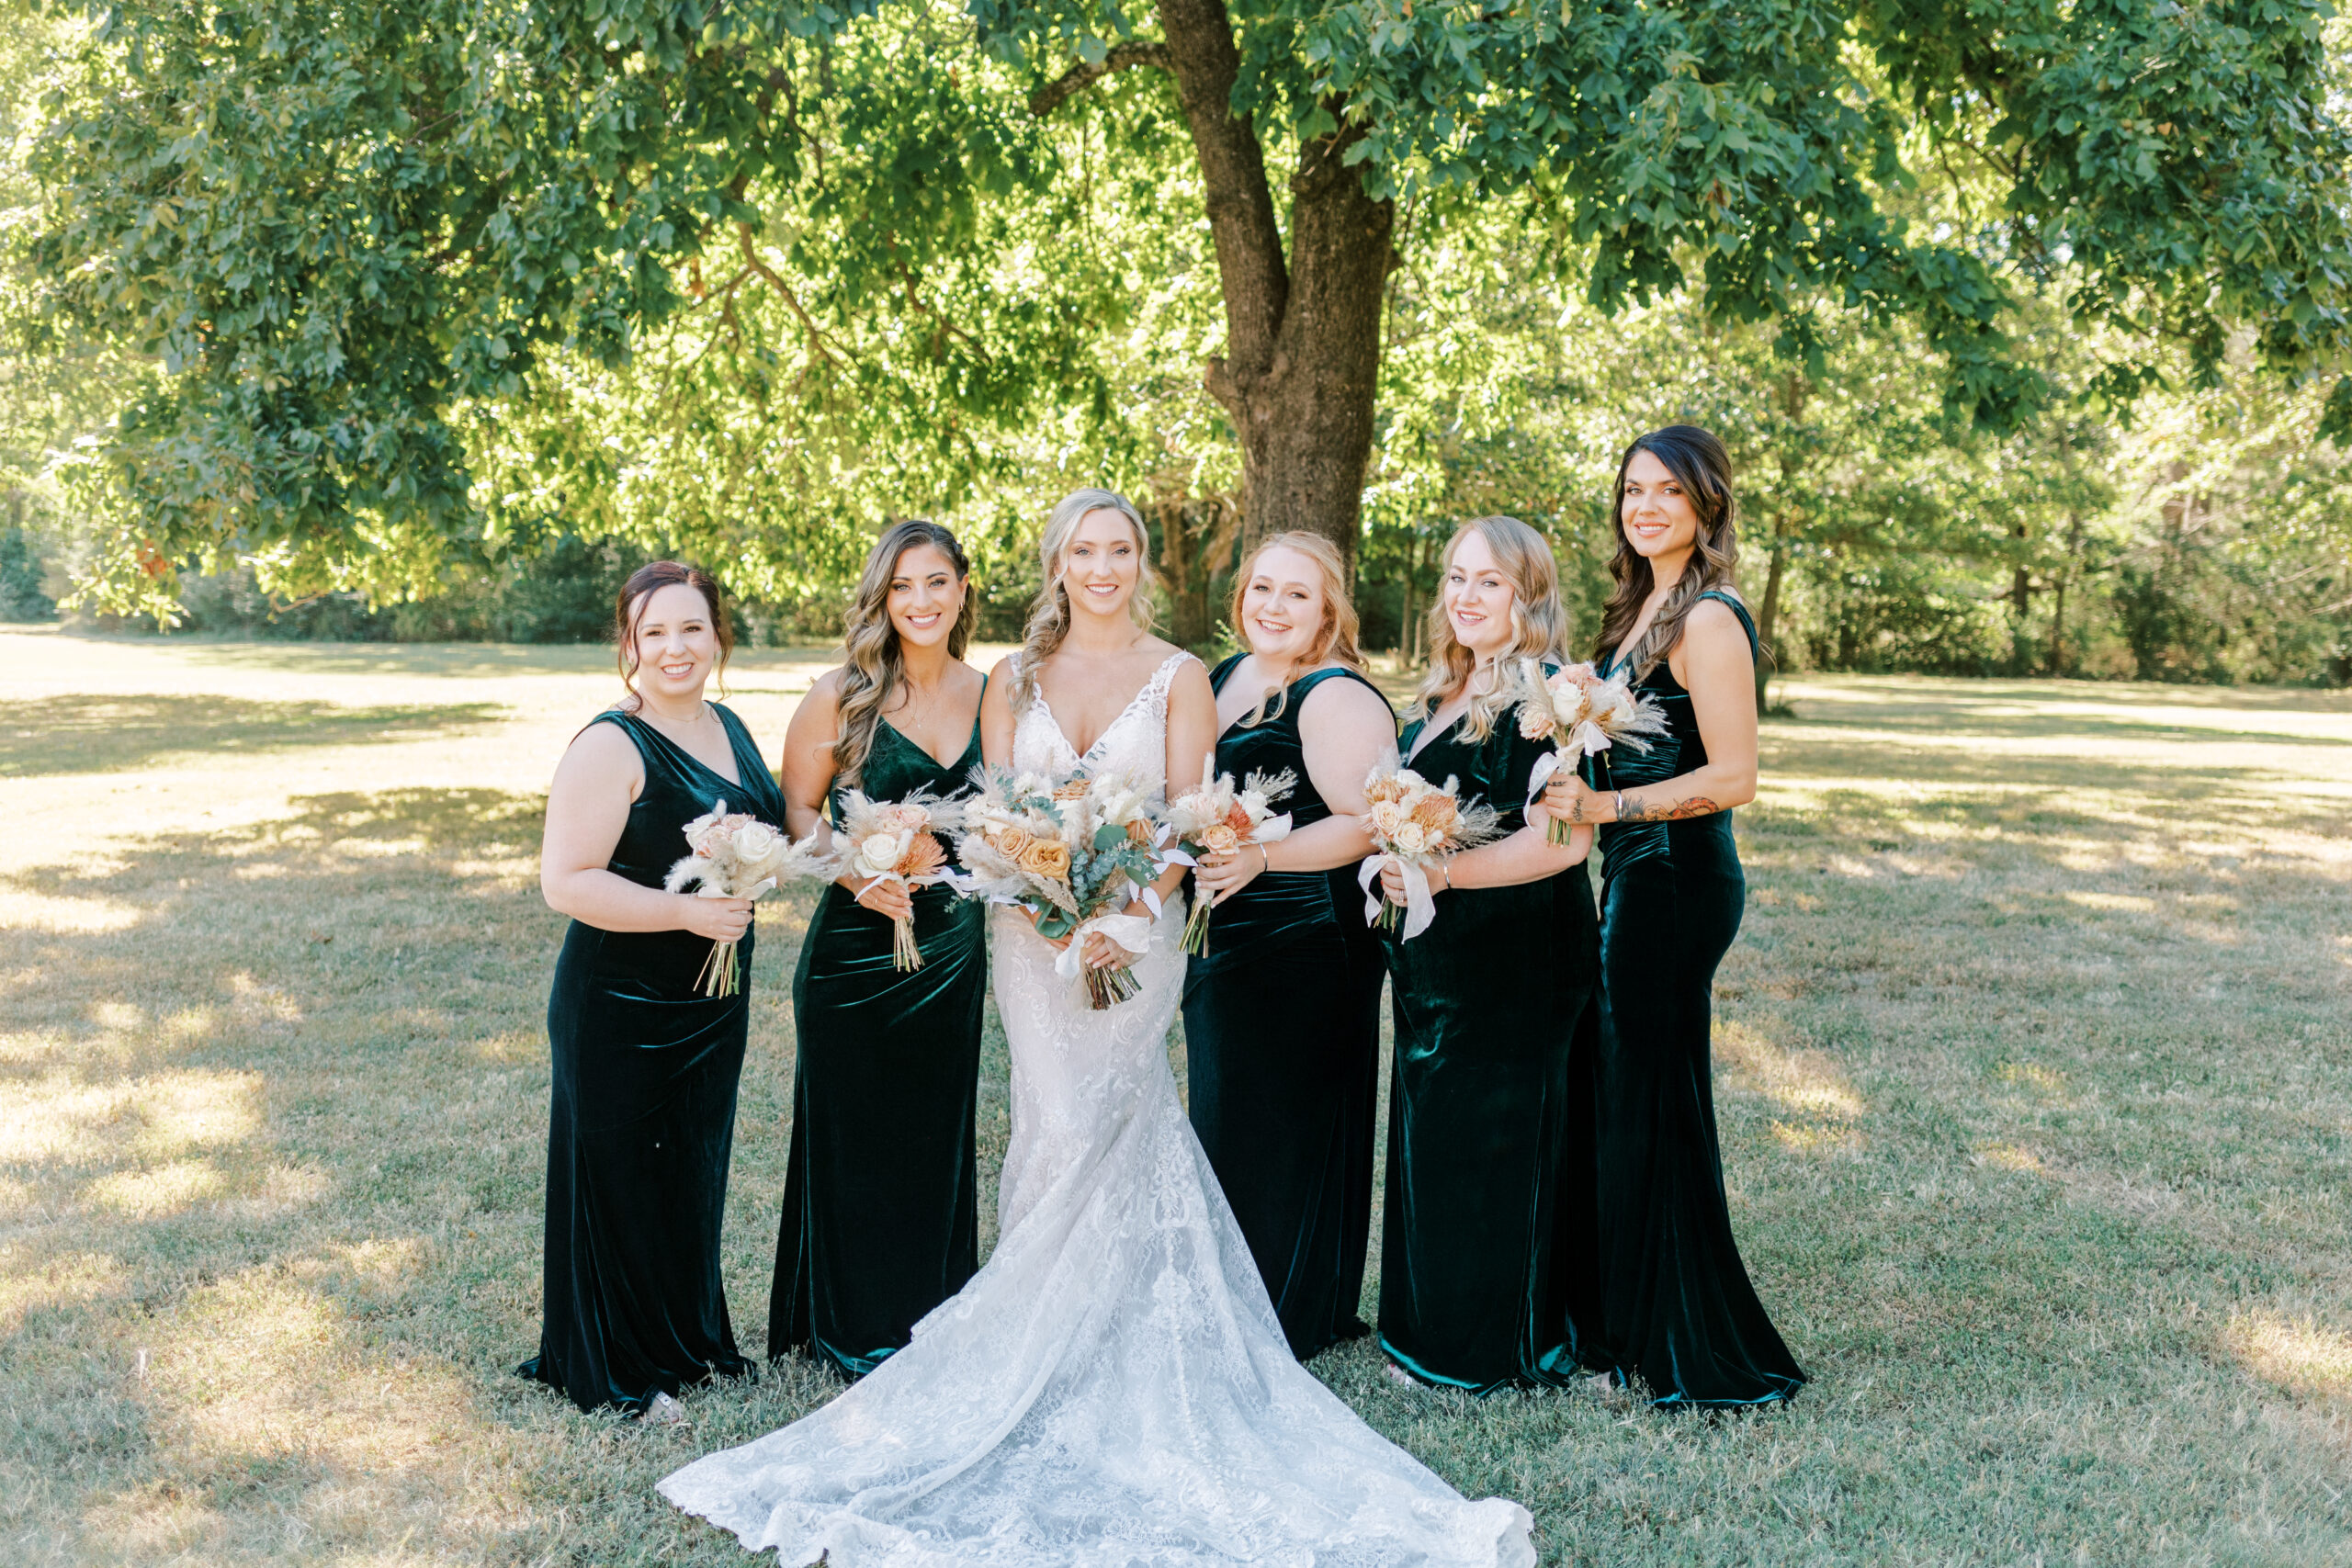 How to be the best bridesmaid